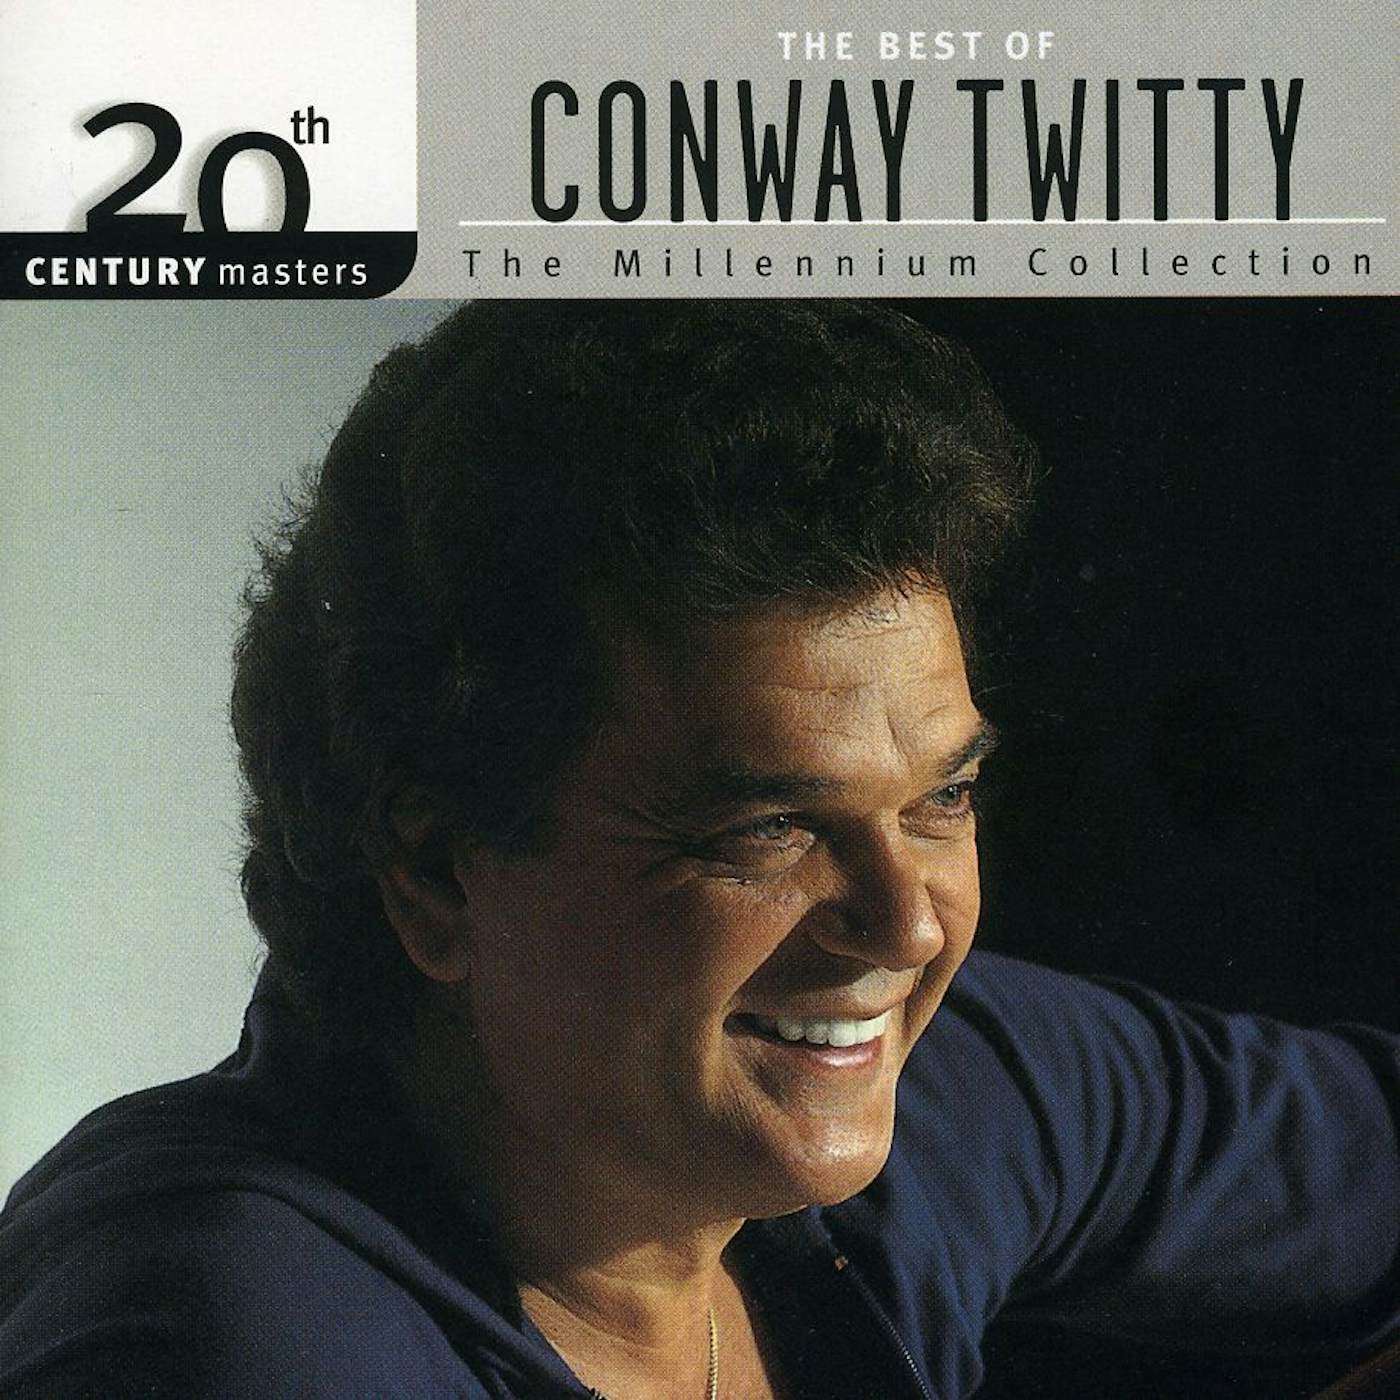 Conway Twitty 20TH CENTURY MASTERS CD